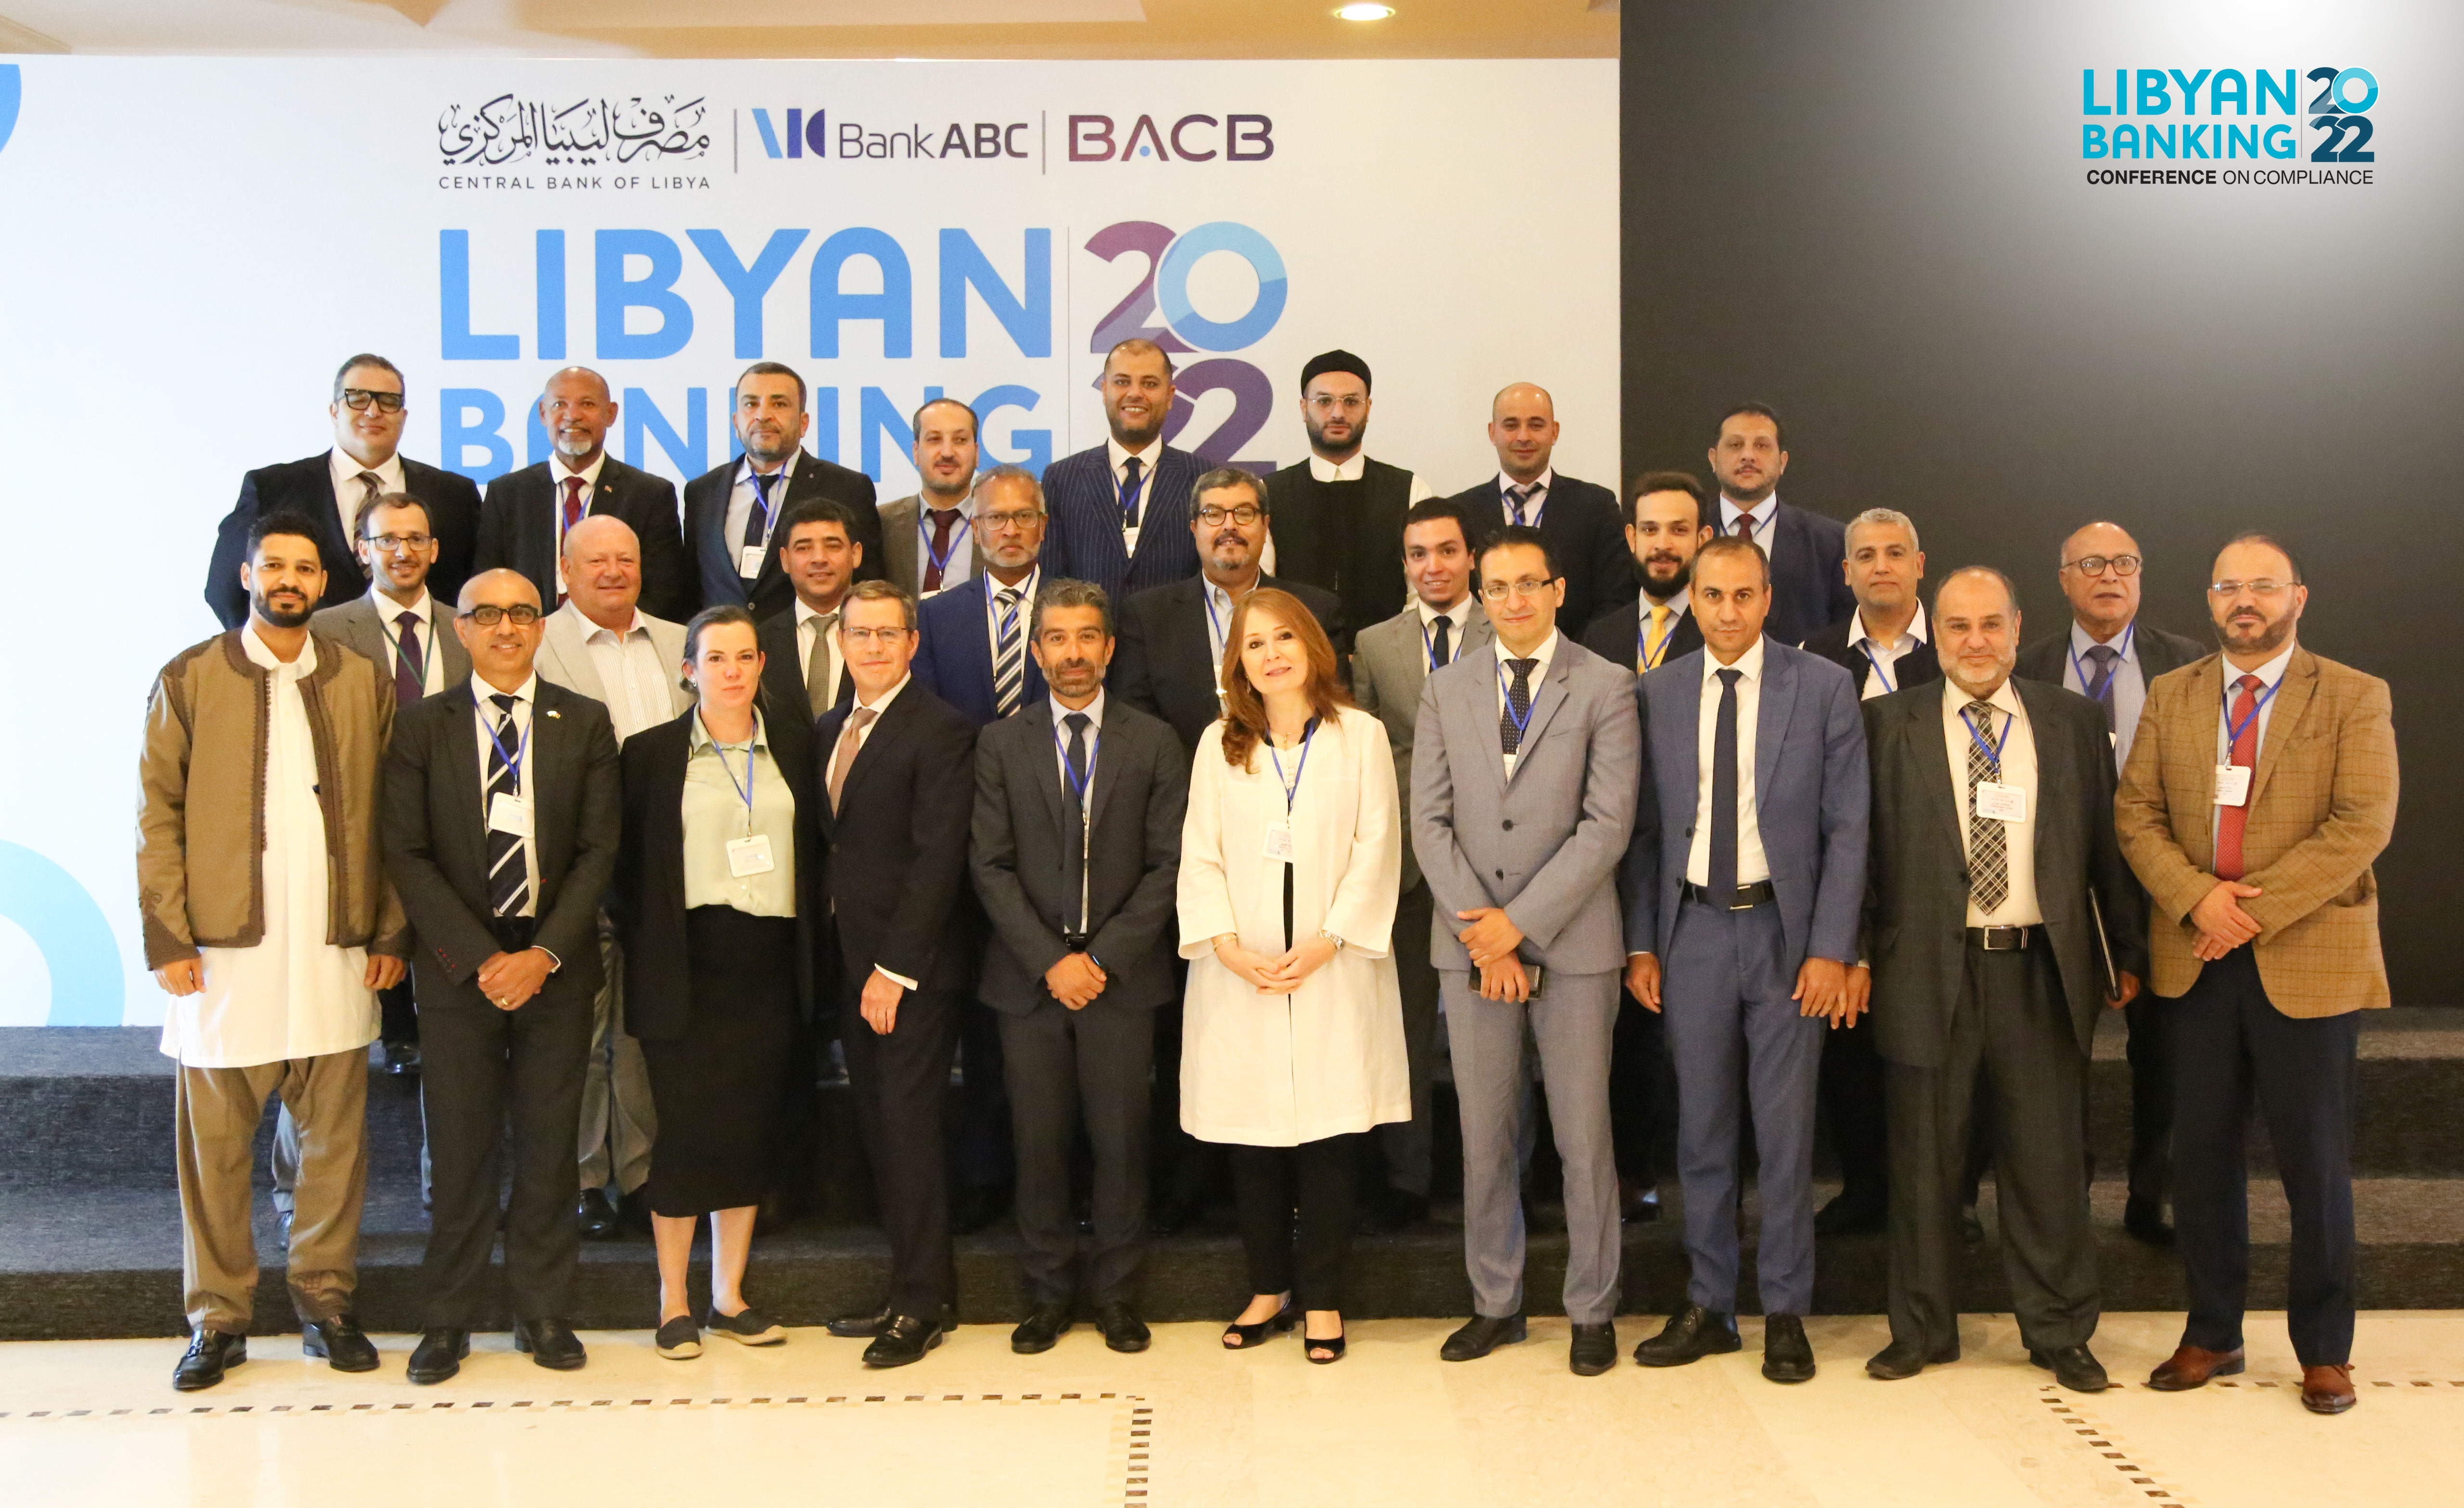 Libyan Banking Conference